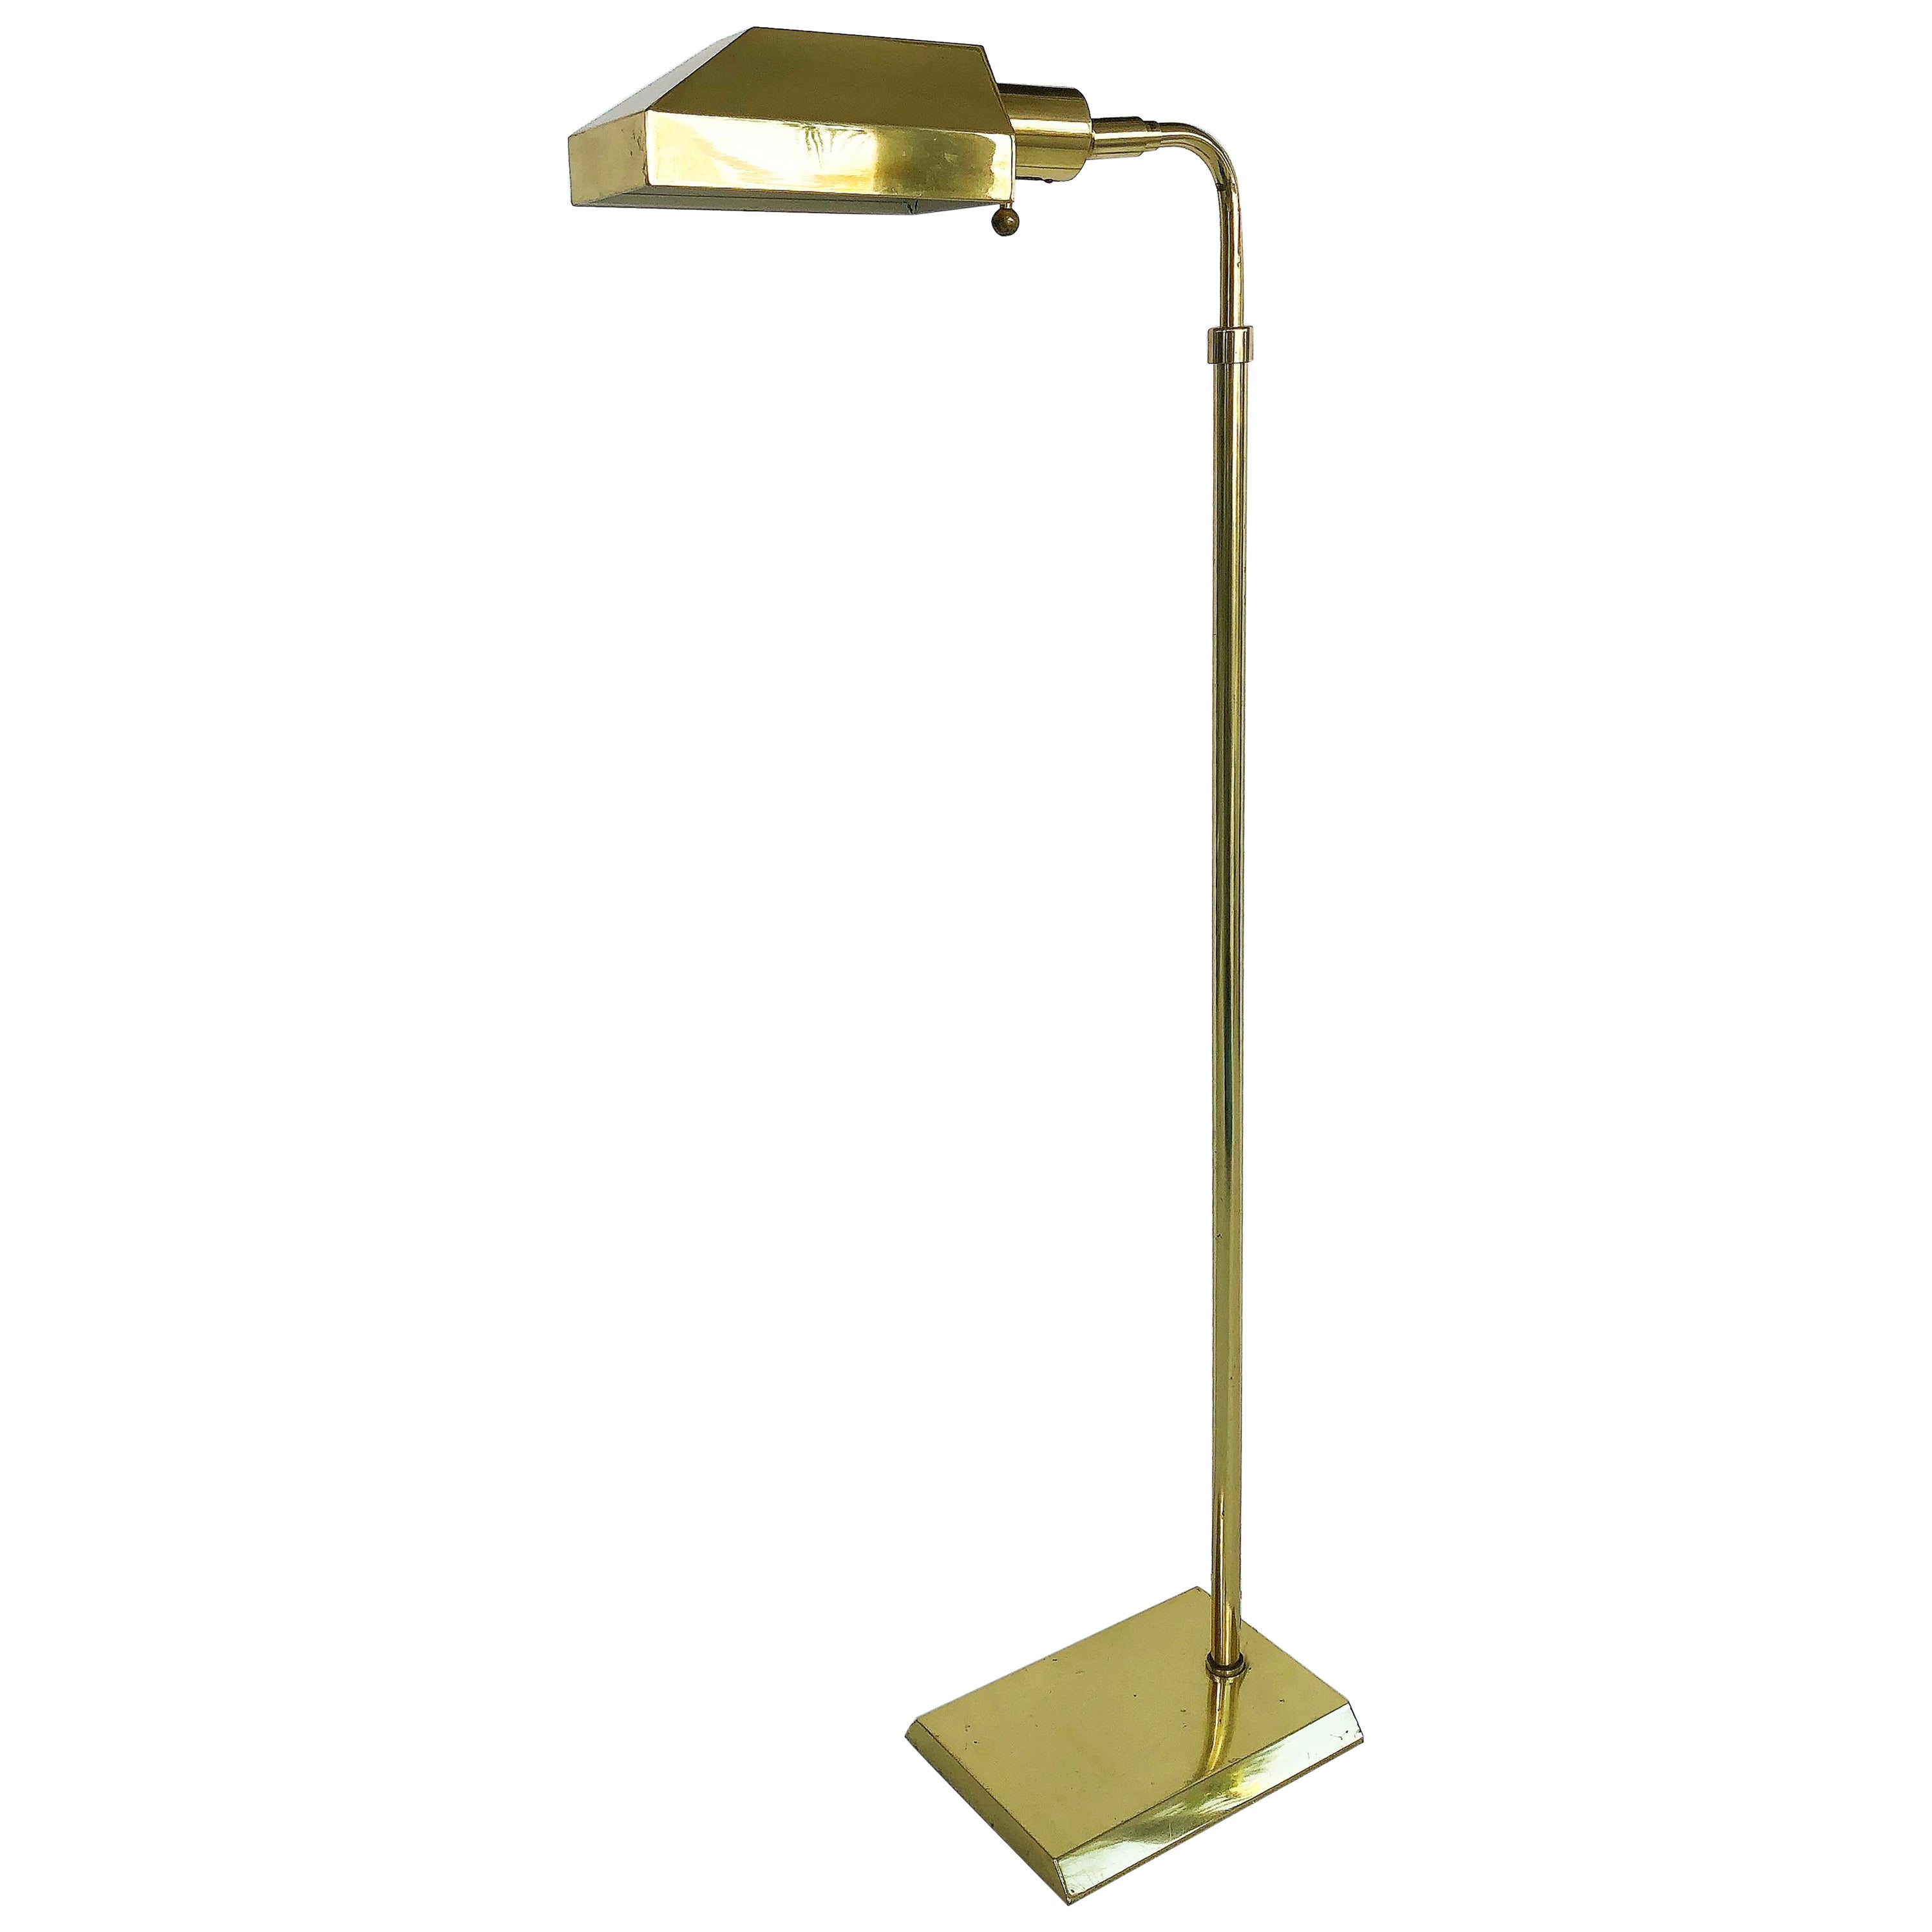 1980s Vintage Brass Plated Adjustable Height Floor Lamp, Pivoting Light For Sale